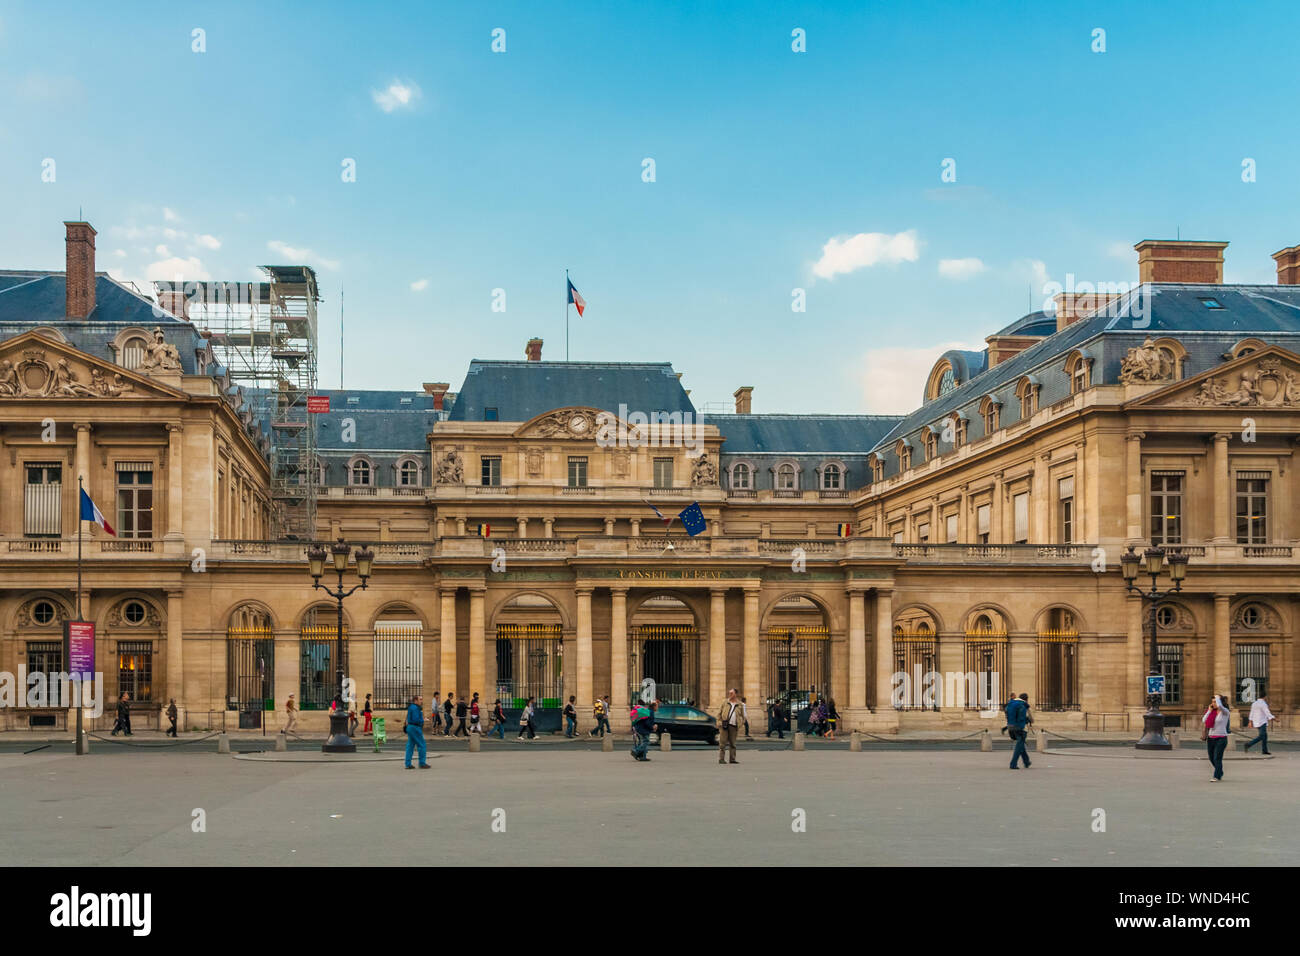 Great panoramic view of the Conseil d’État, the Council of State of the French national government. The historical building was the former Palais... Stock Photo